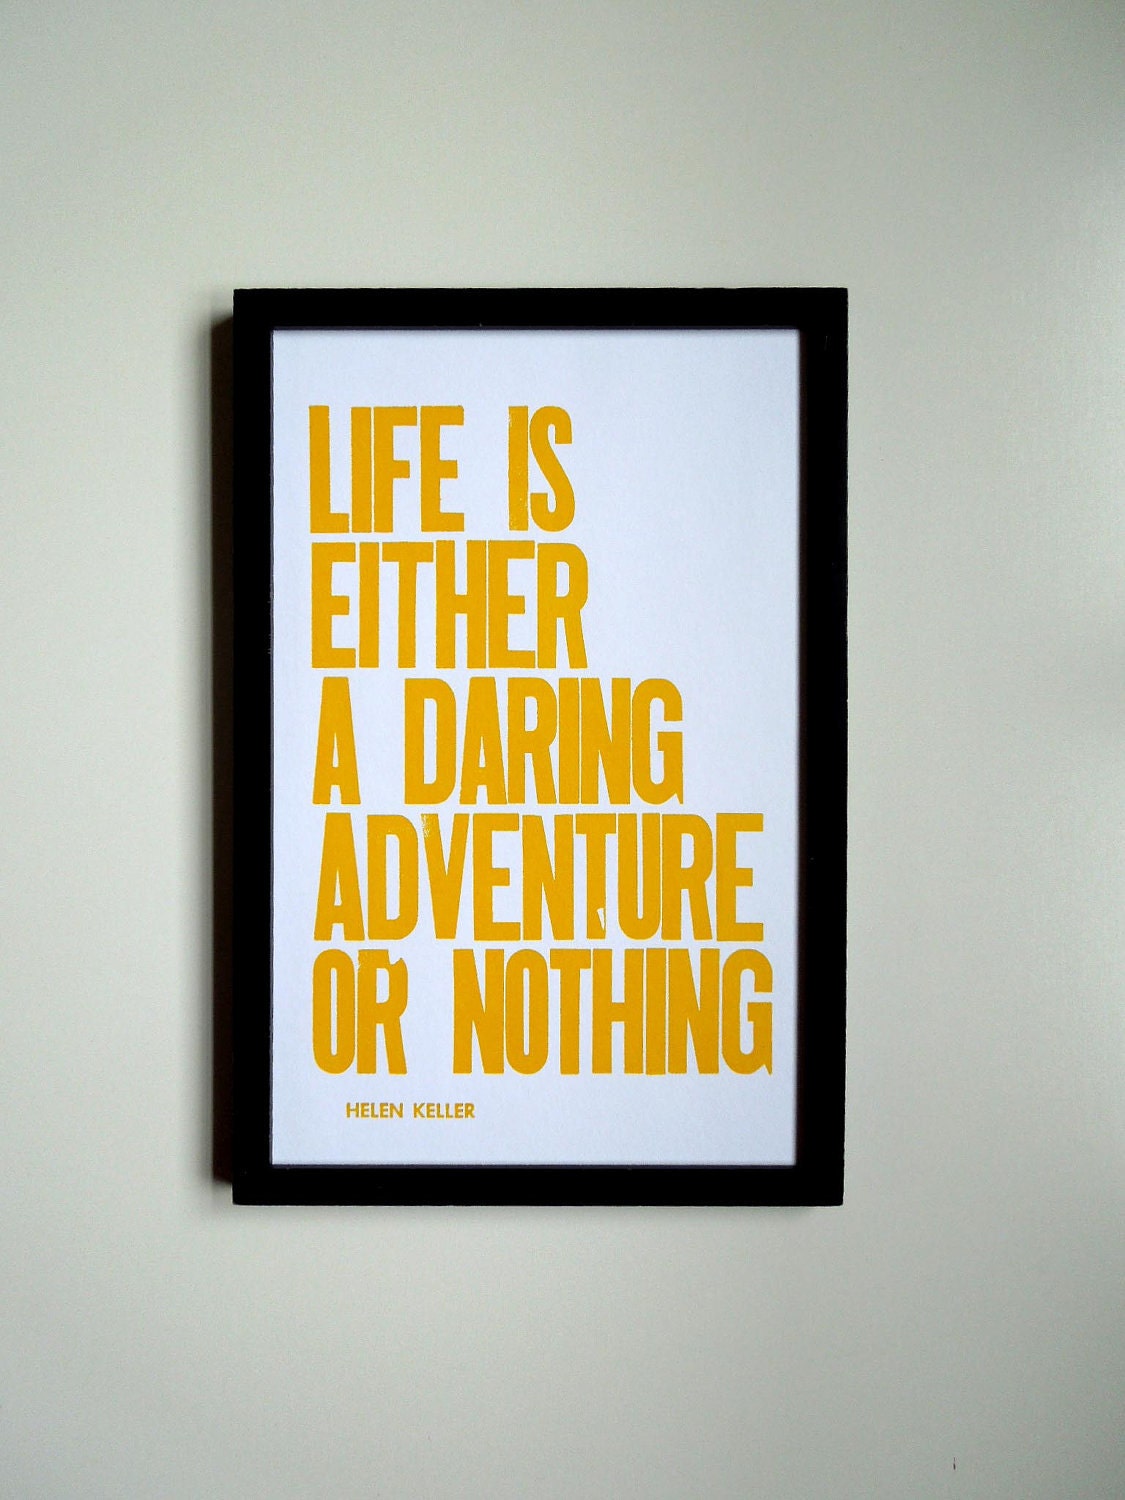 Yellow Travel Theme Poster, Bright Colorful Cheery Wall Decor Typograpy, Life is Either a Daring Adventure or Nothing Letterpress Print